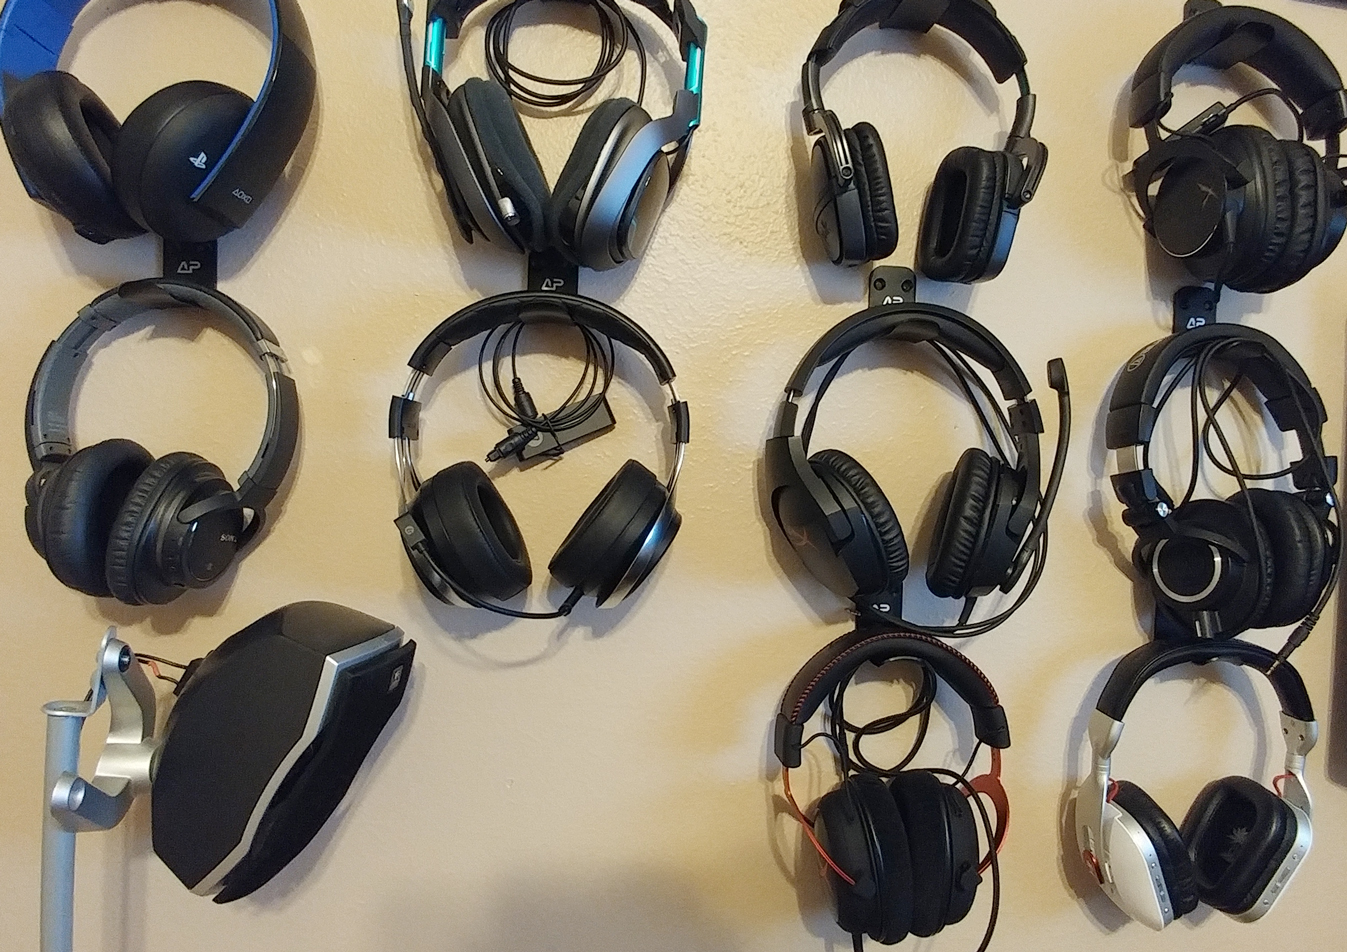 Brian Hoss High-Def Digest Review - HyperX Cloud Stinger Gaming Headset on the headset wall